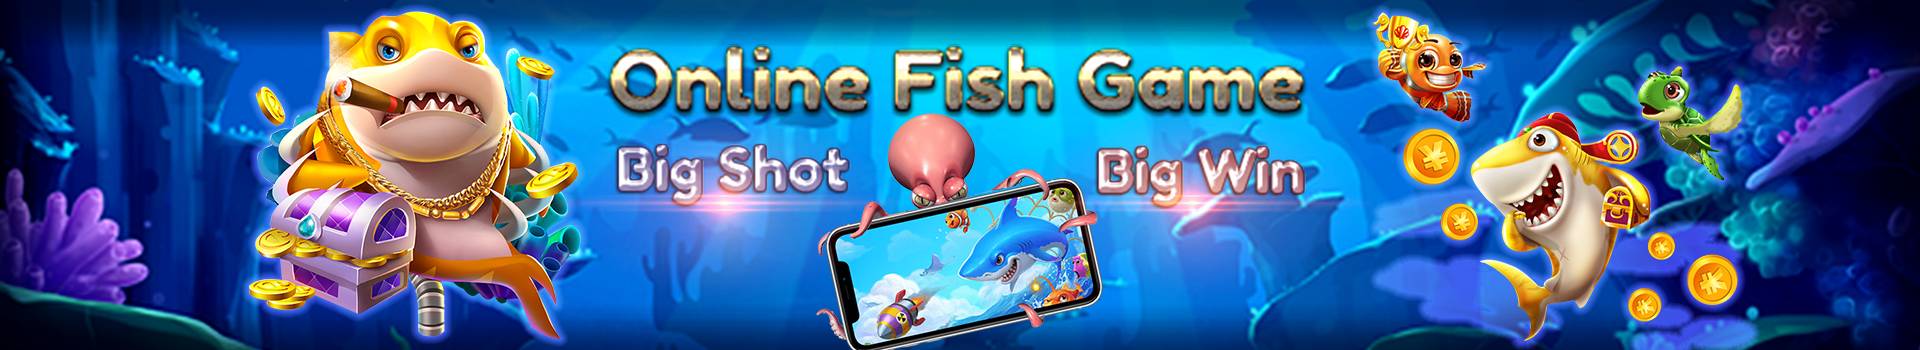 online shooting fish table games